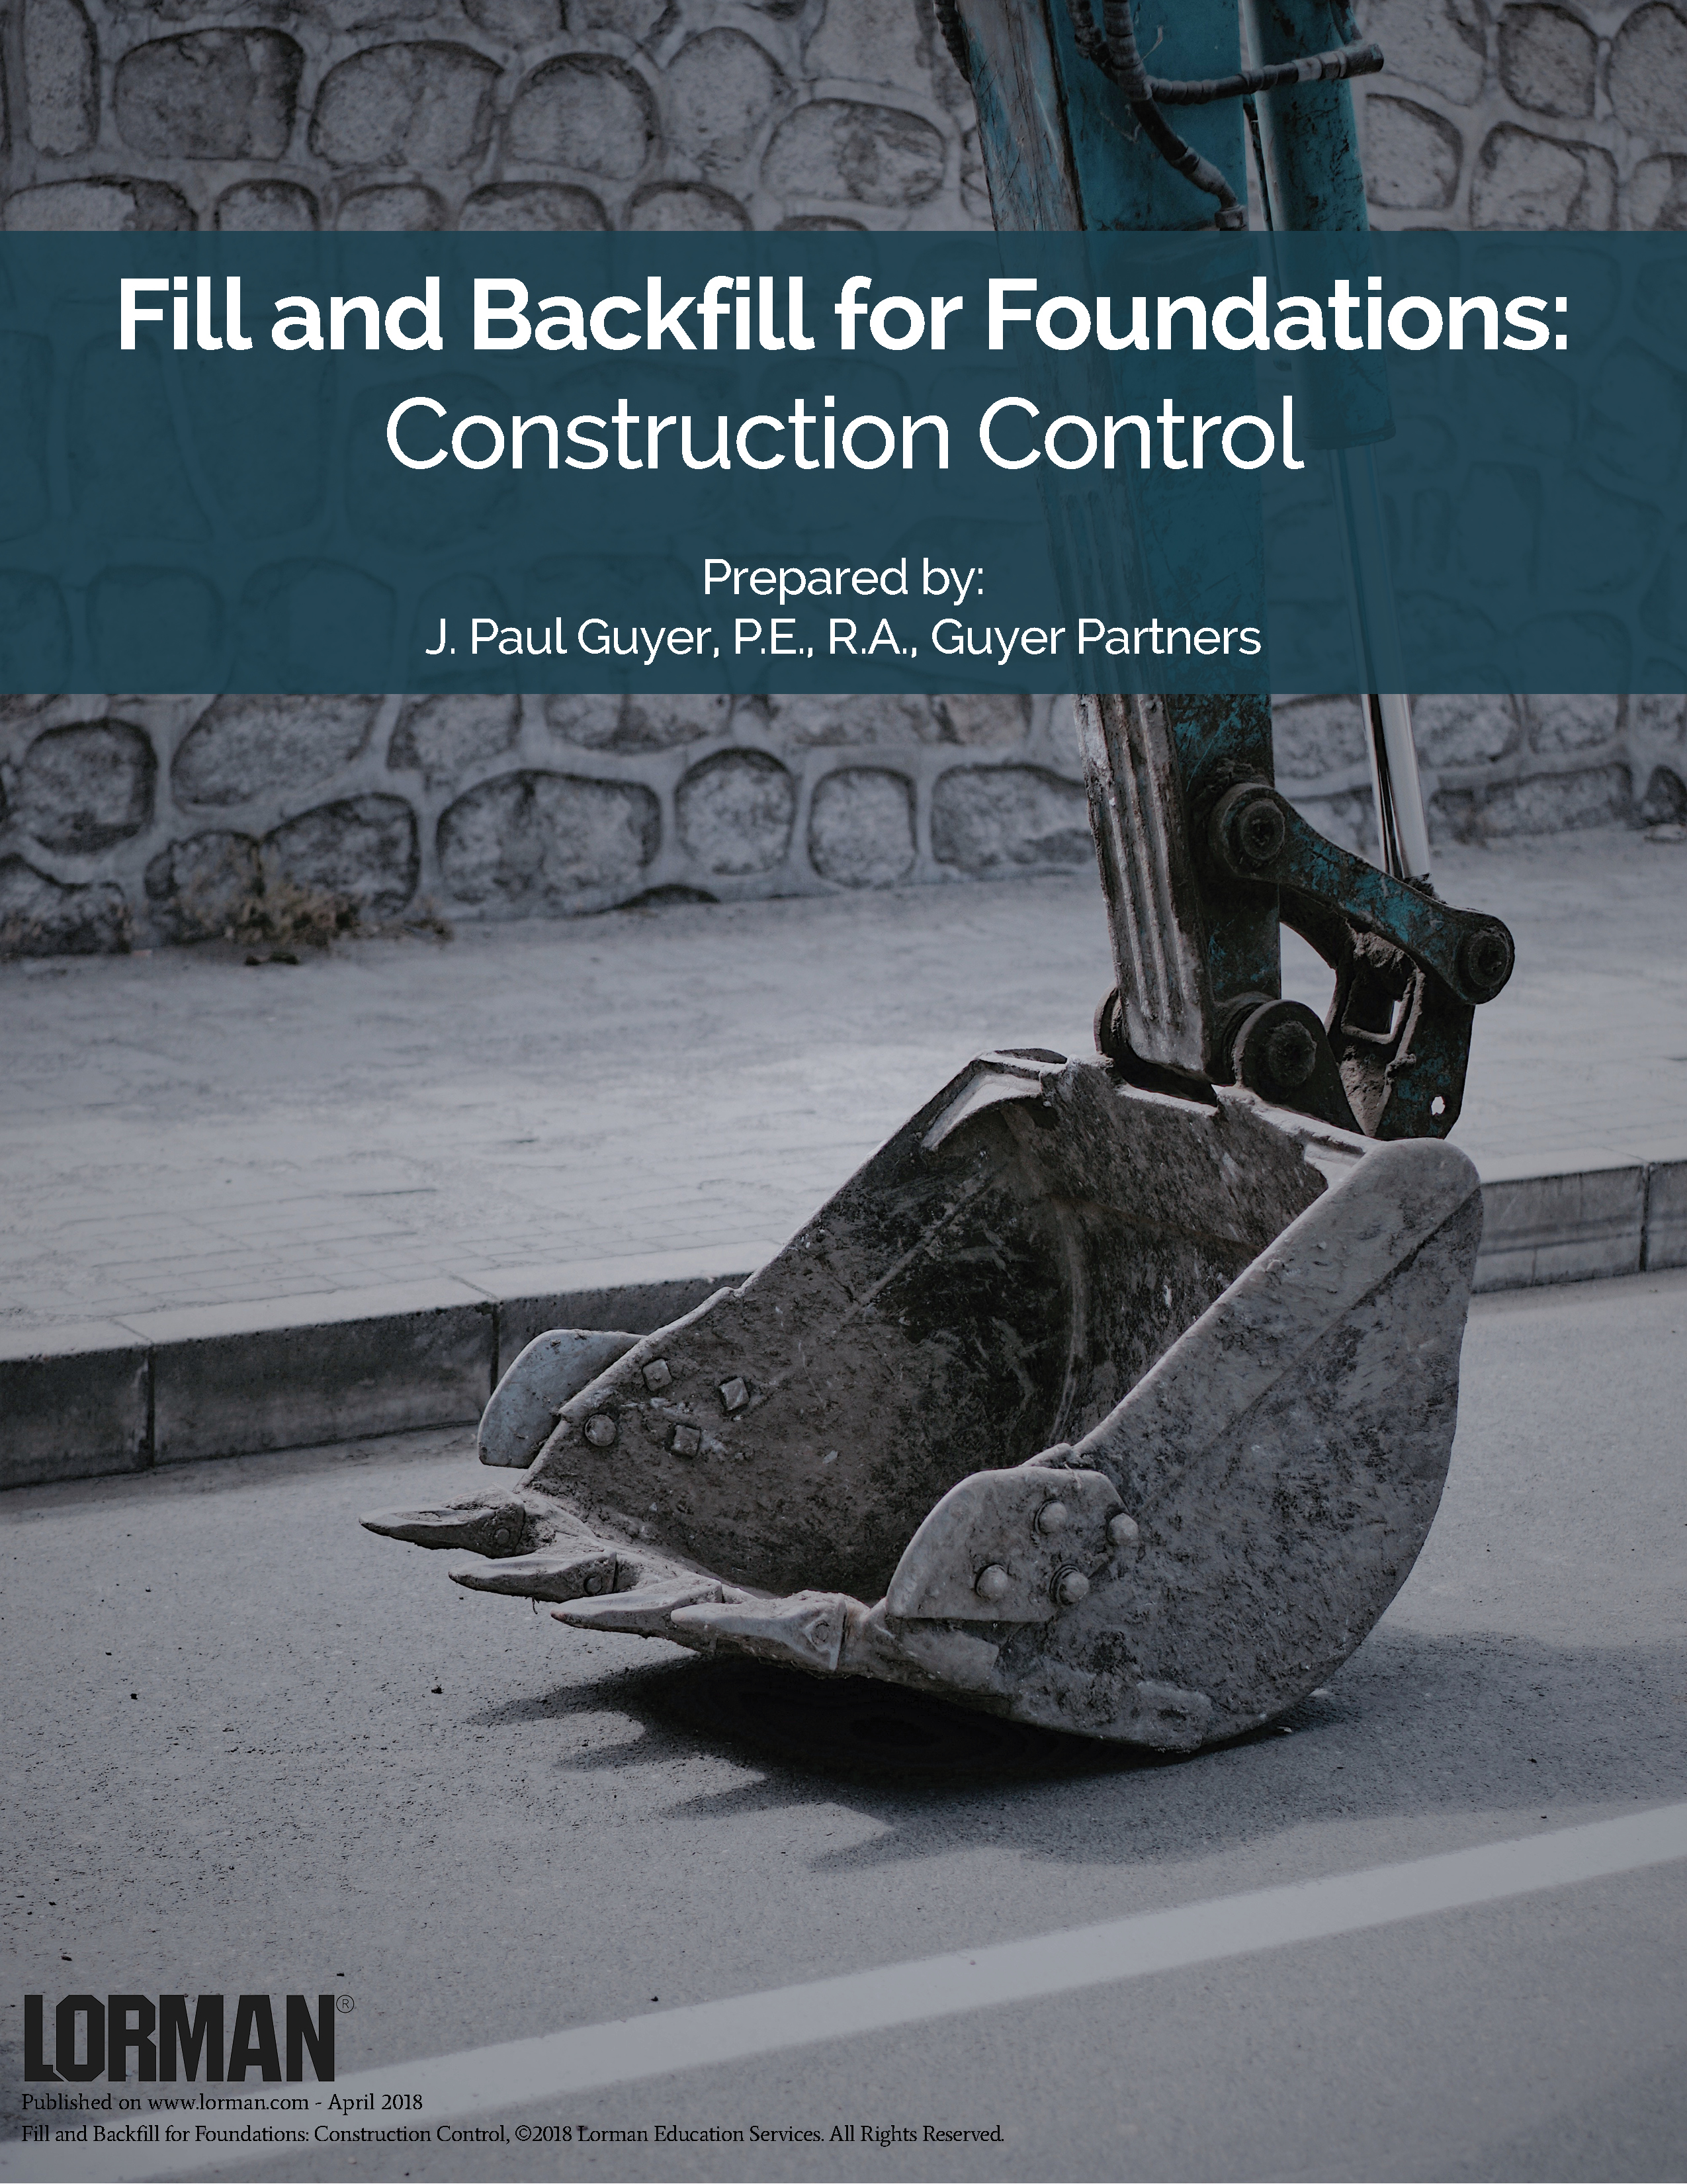 Fill and Backfill for Foundations: Construction Control